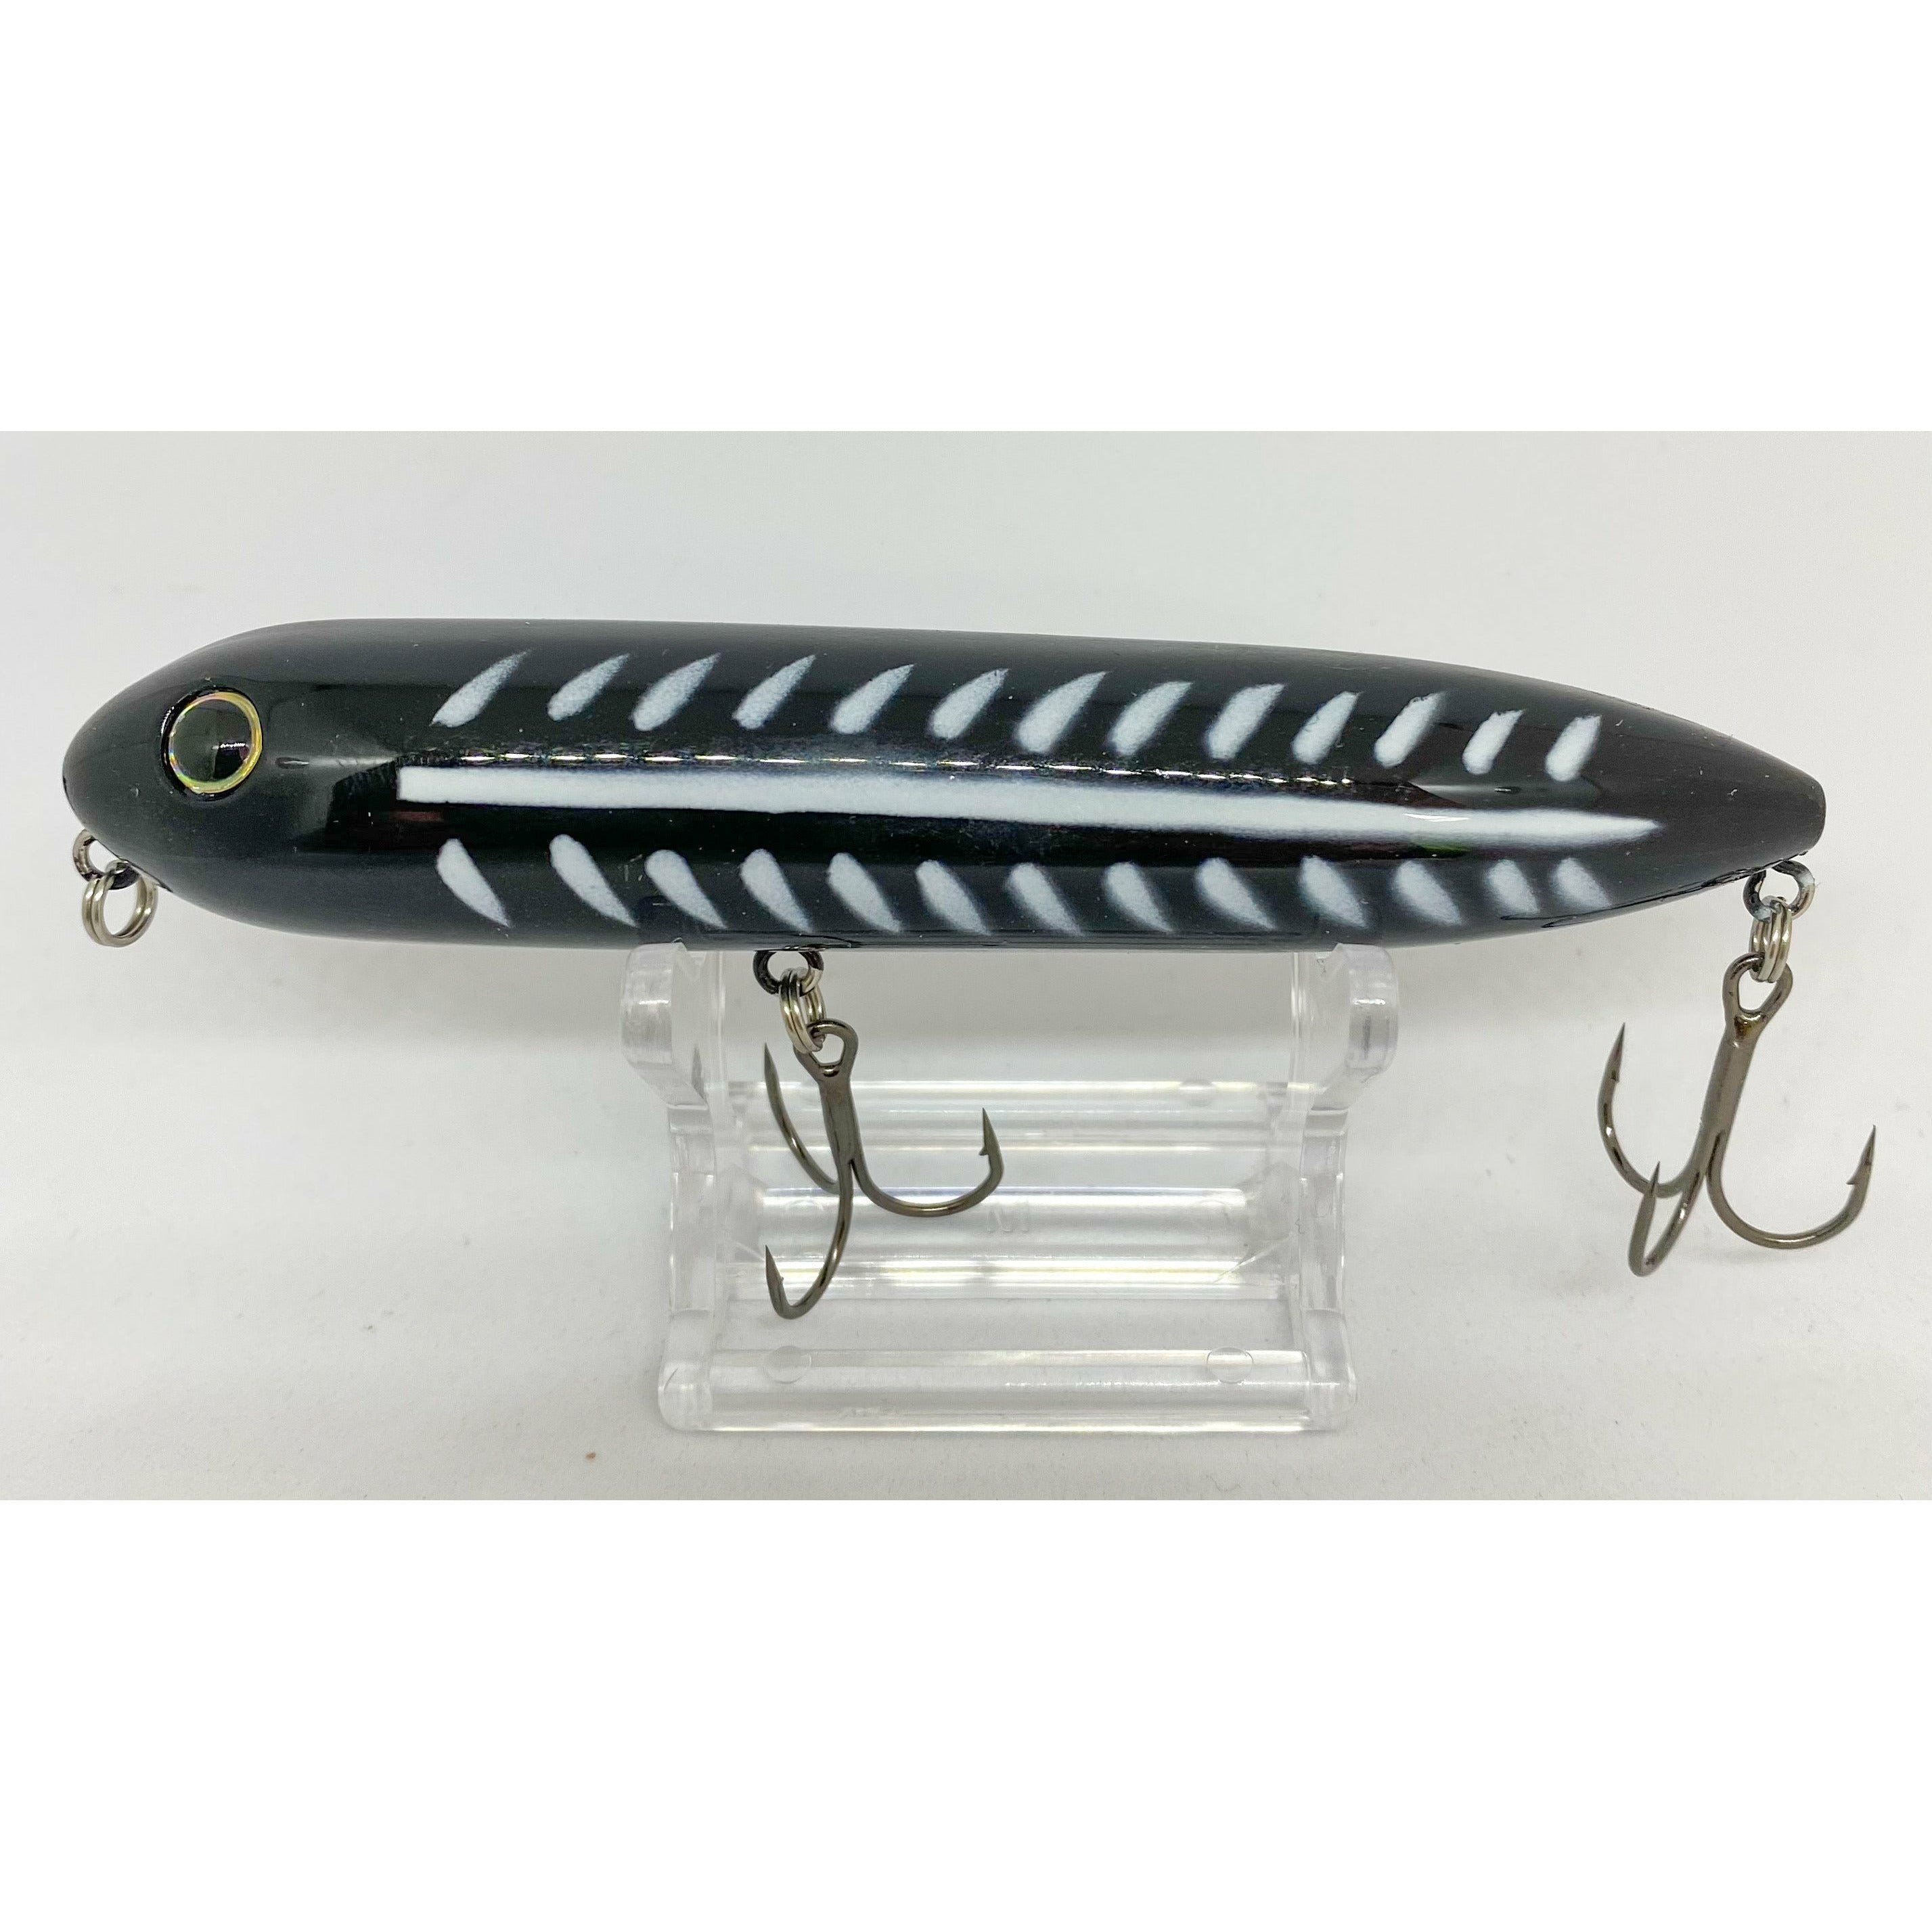 Small Surface 100mm 21g Rattle Topwater Lure